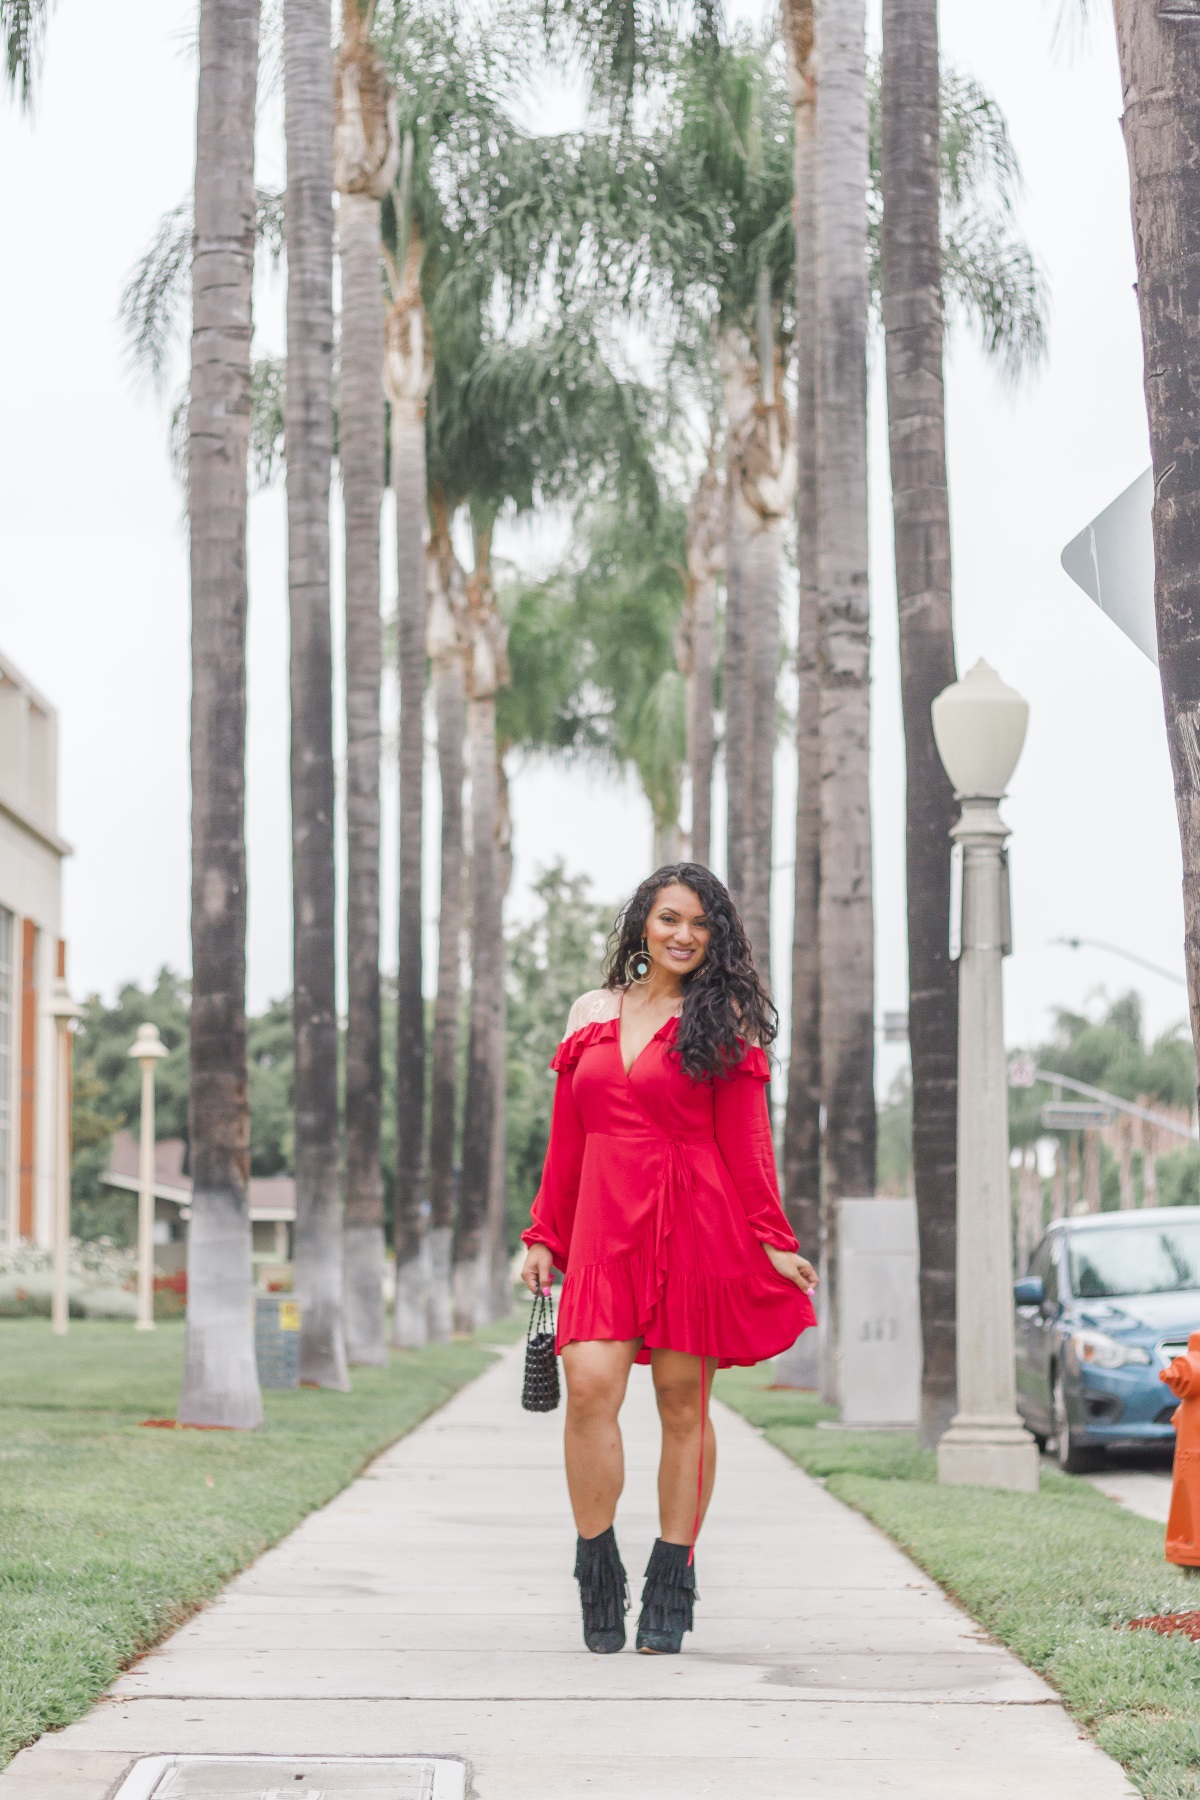 Little Red Dress | Debbie Savage Orange County Fashion Blogger at To Thine Own Style Be True